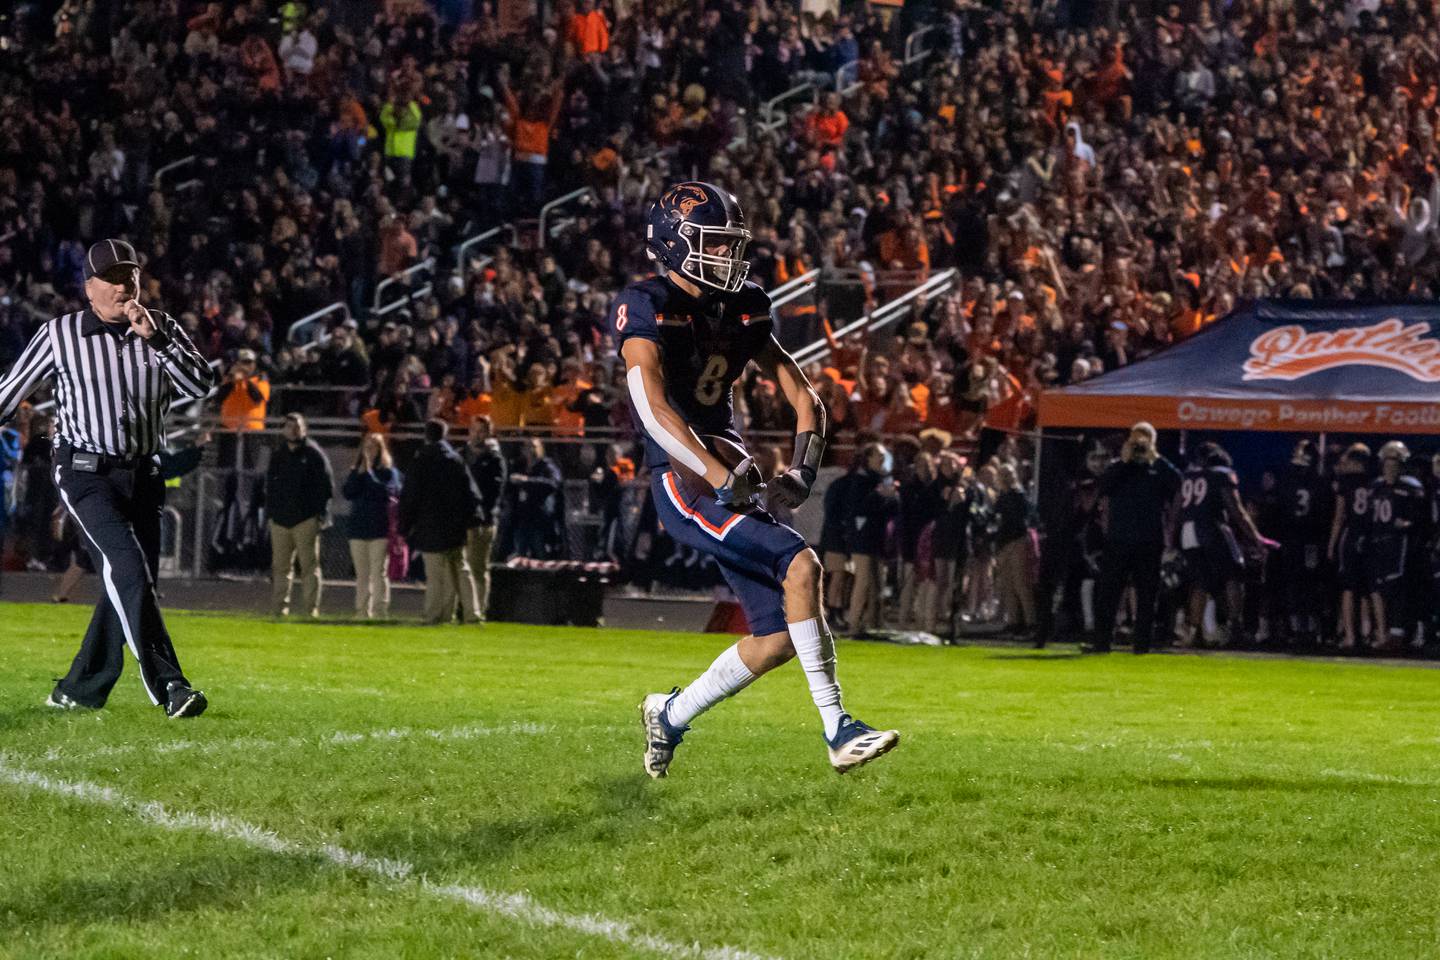 Oswego’s Connor Deal (8) celebrates after scoring on a reception against Oswego East during a high school football game at Oswego High School in Oswego on Friday, Oct 15, 2021.